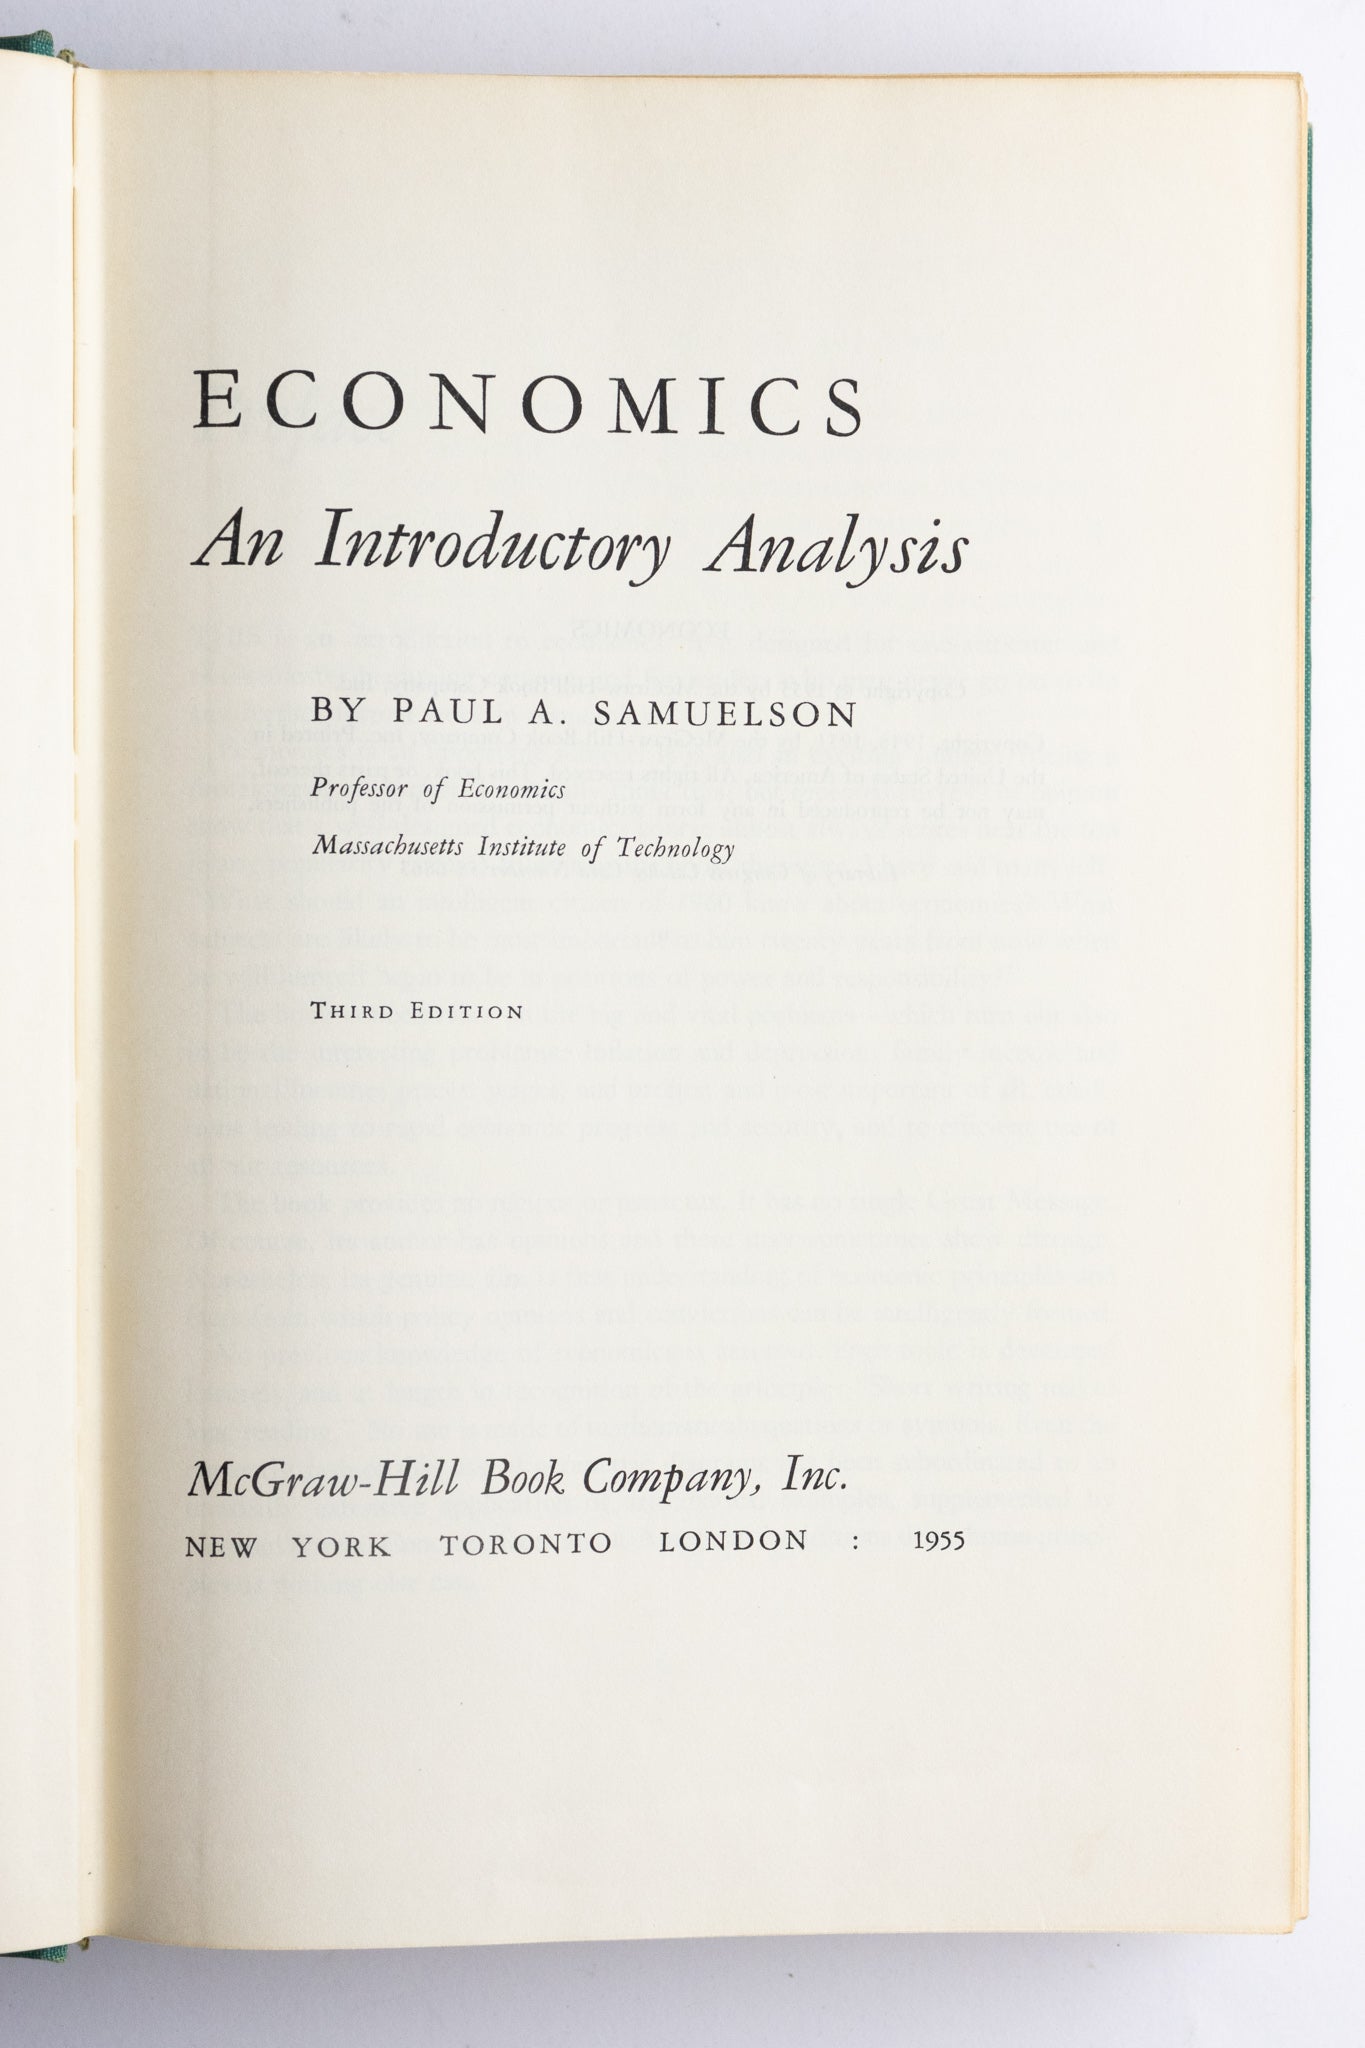 Economics: An Introductory Analysis - Stemcell Science Shop